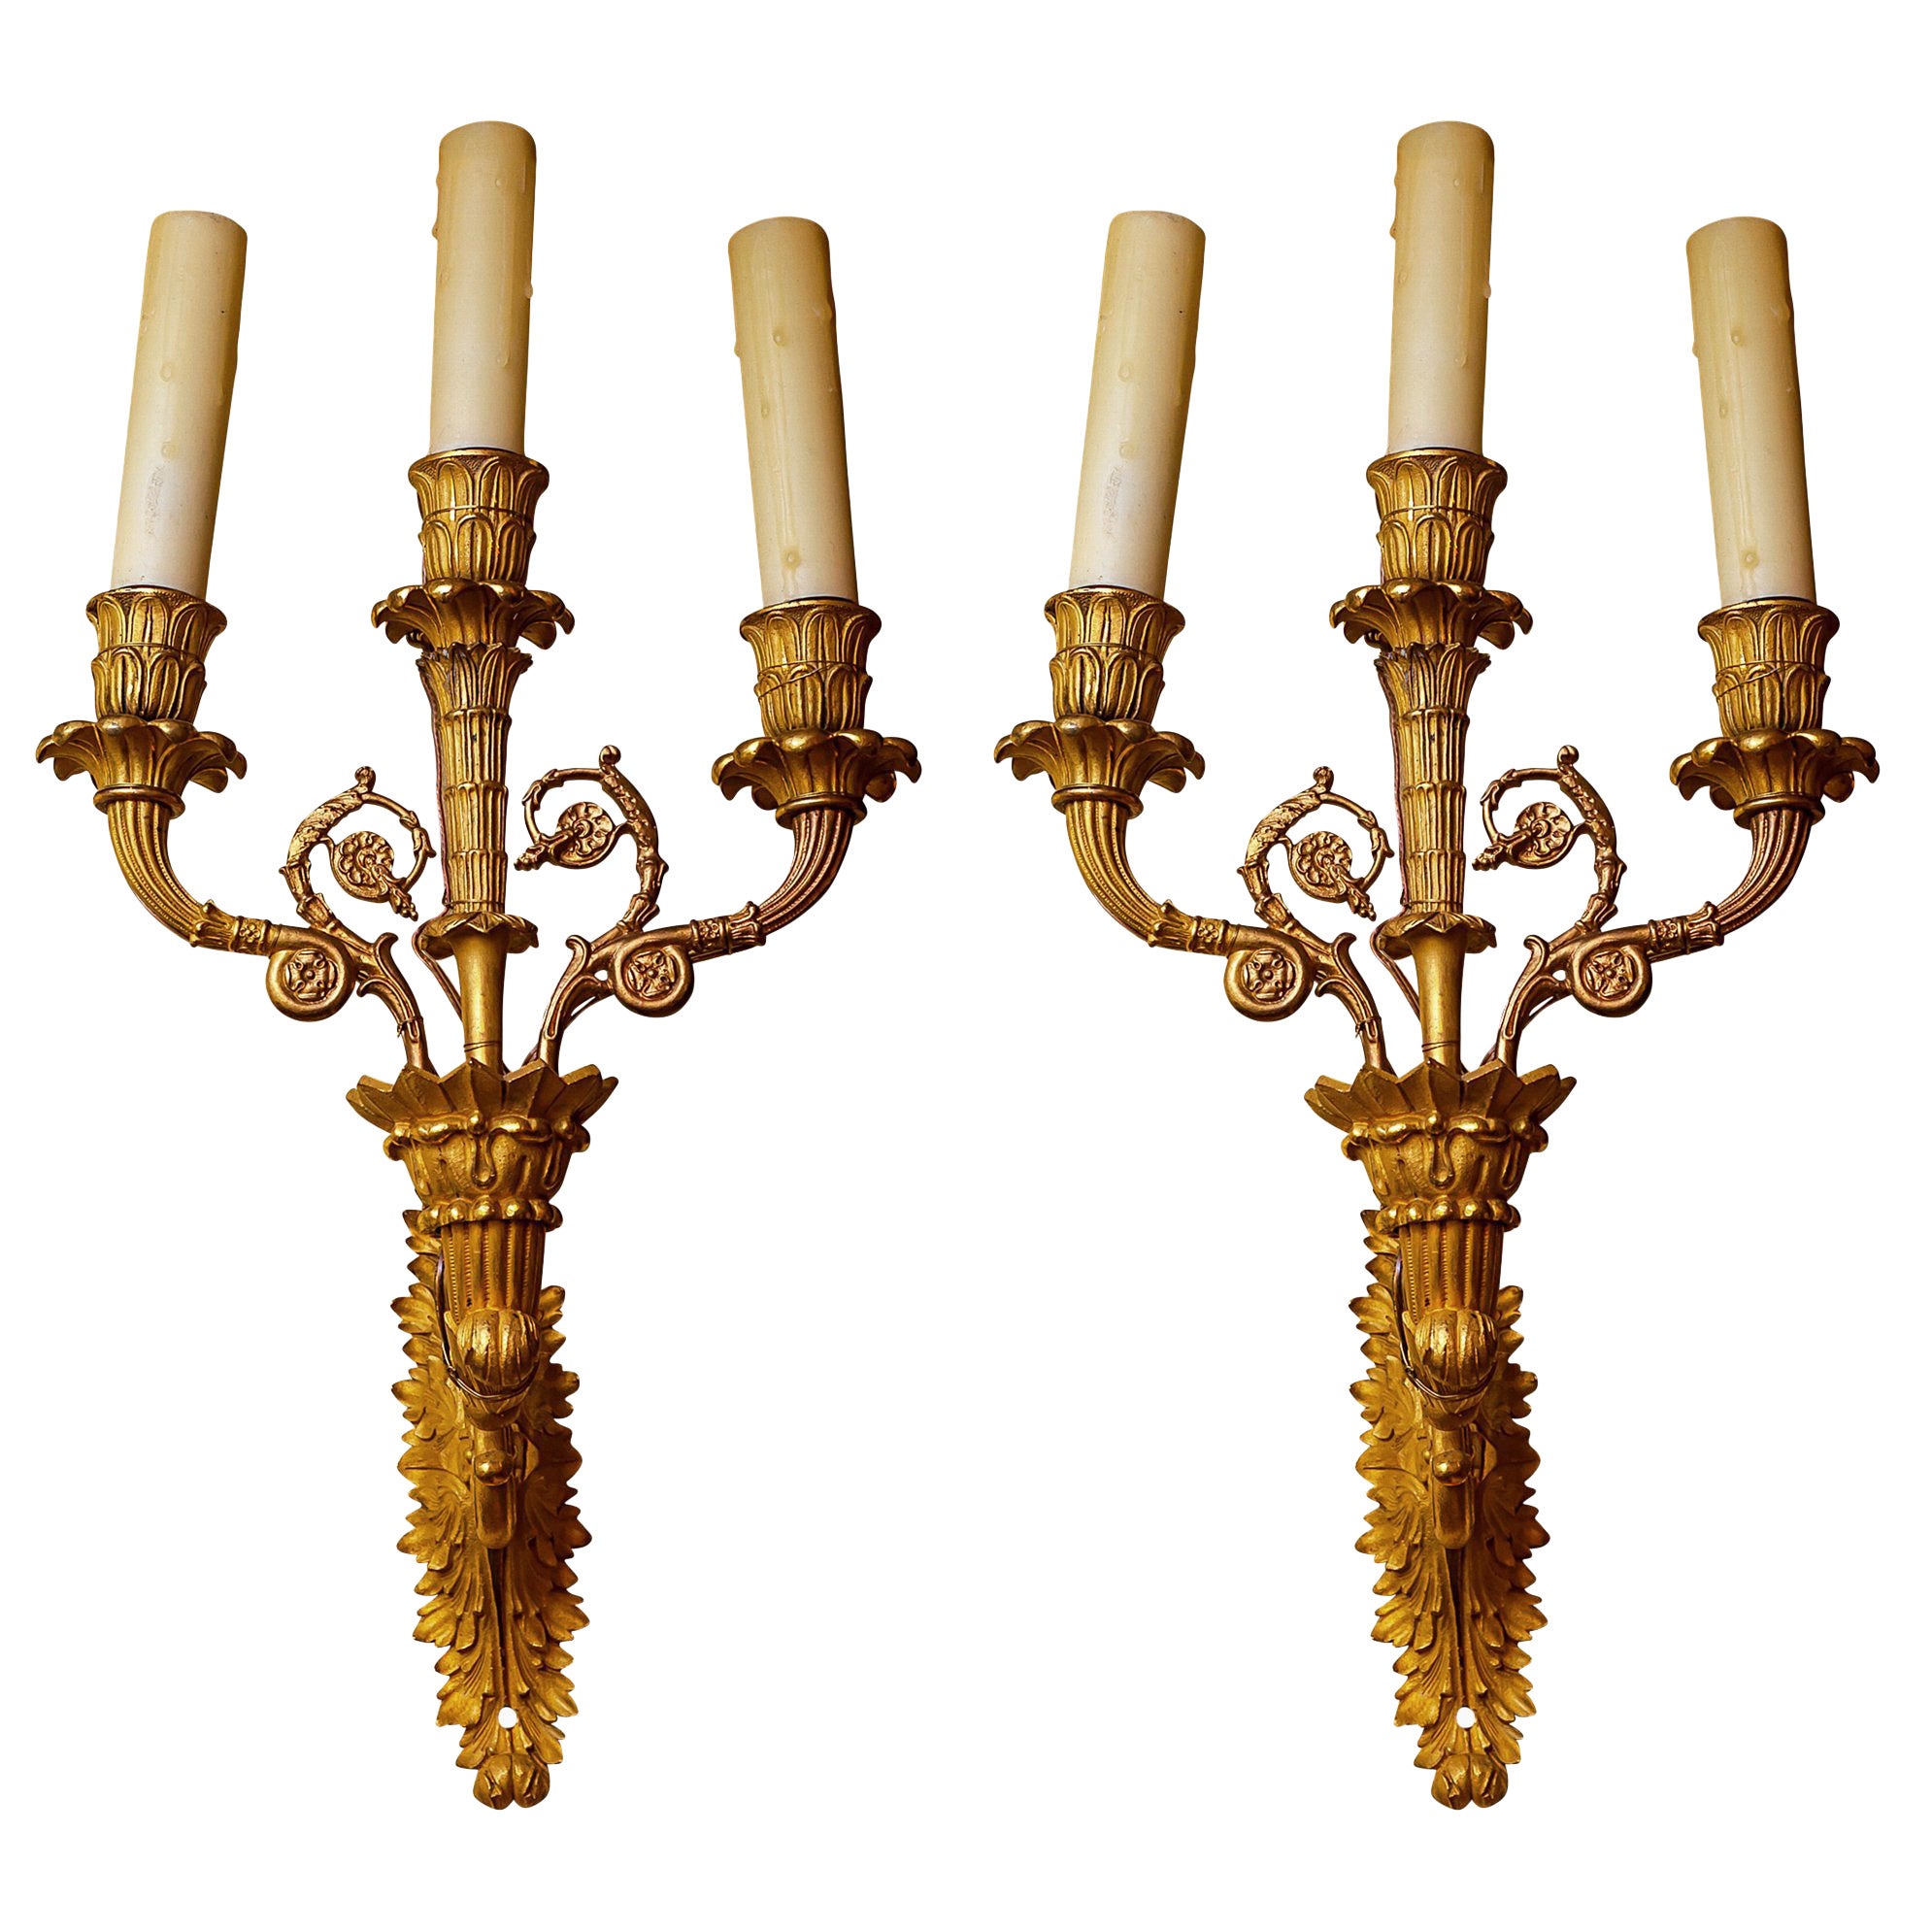 Pair of Emire Style Gilt Bronze Three-Arm Wall Light Sconces For Sale